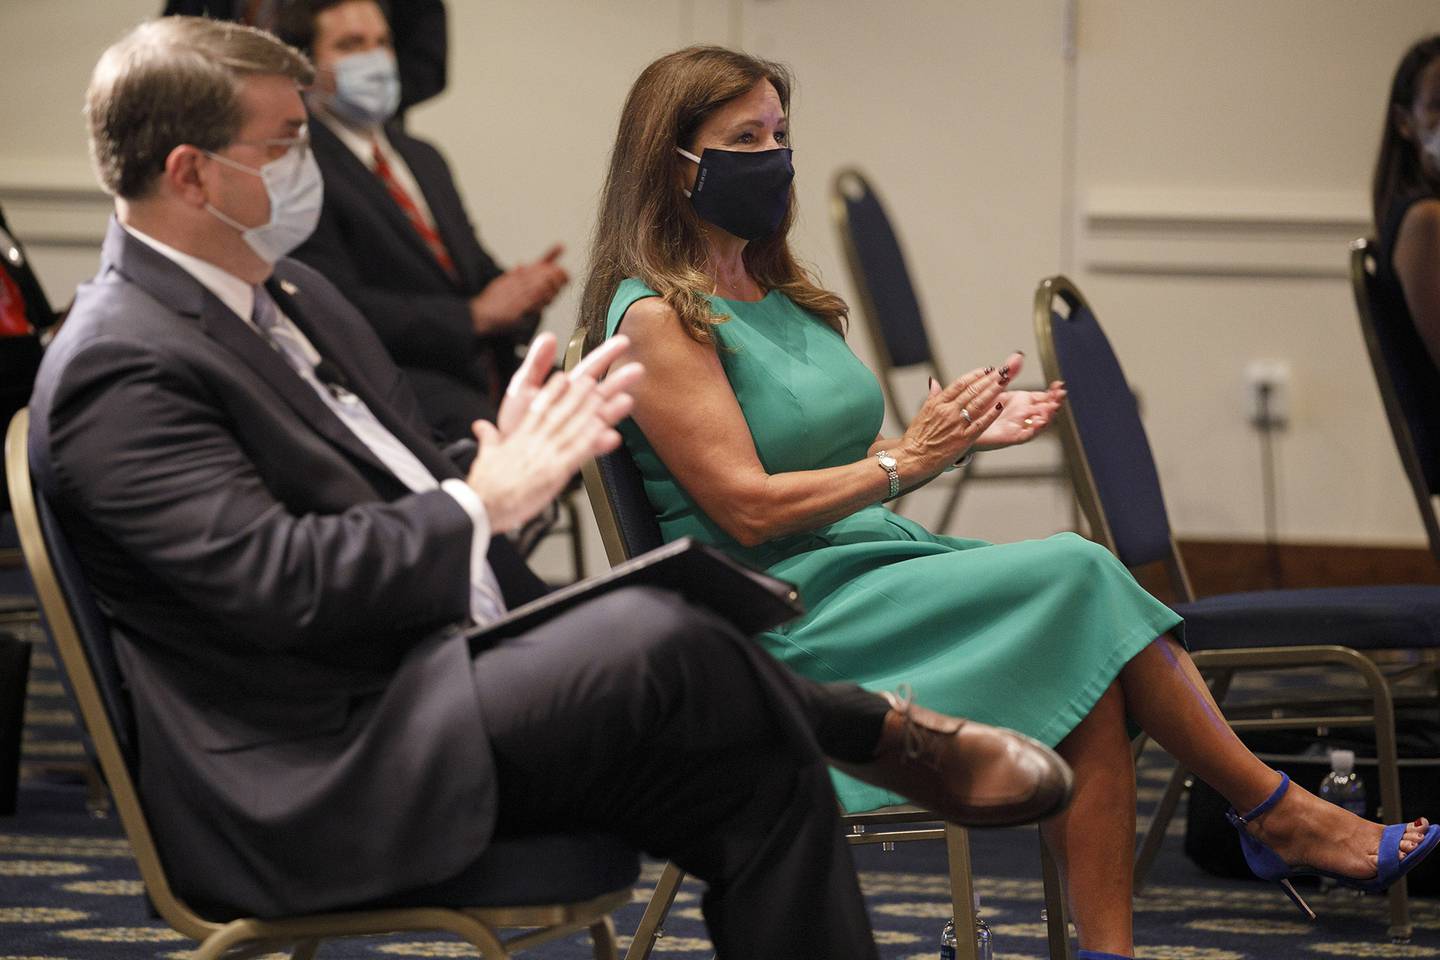 Secretary of Veterans Affairs Richard Wilkie, left, and second lady Karen Pence, wearing protective masks against COVID-19, applaud as they attend an event on a campaign to raise awareness on the risks of veterans suicide on July 7, 2020, at the National Press Club in Washington.